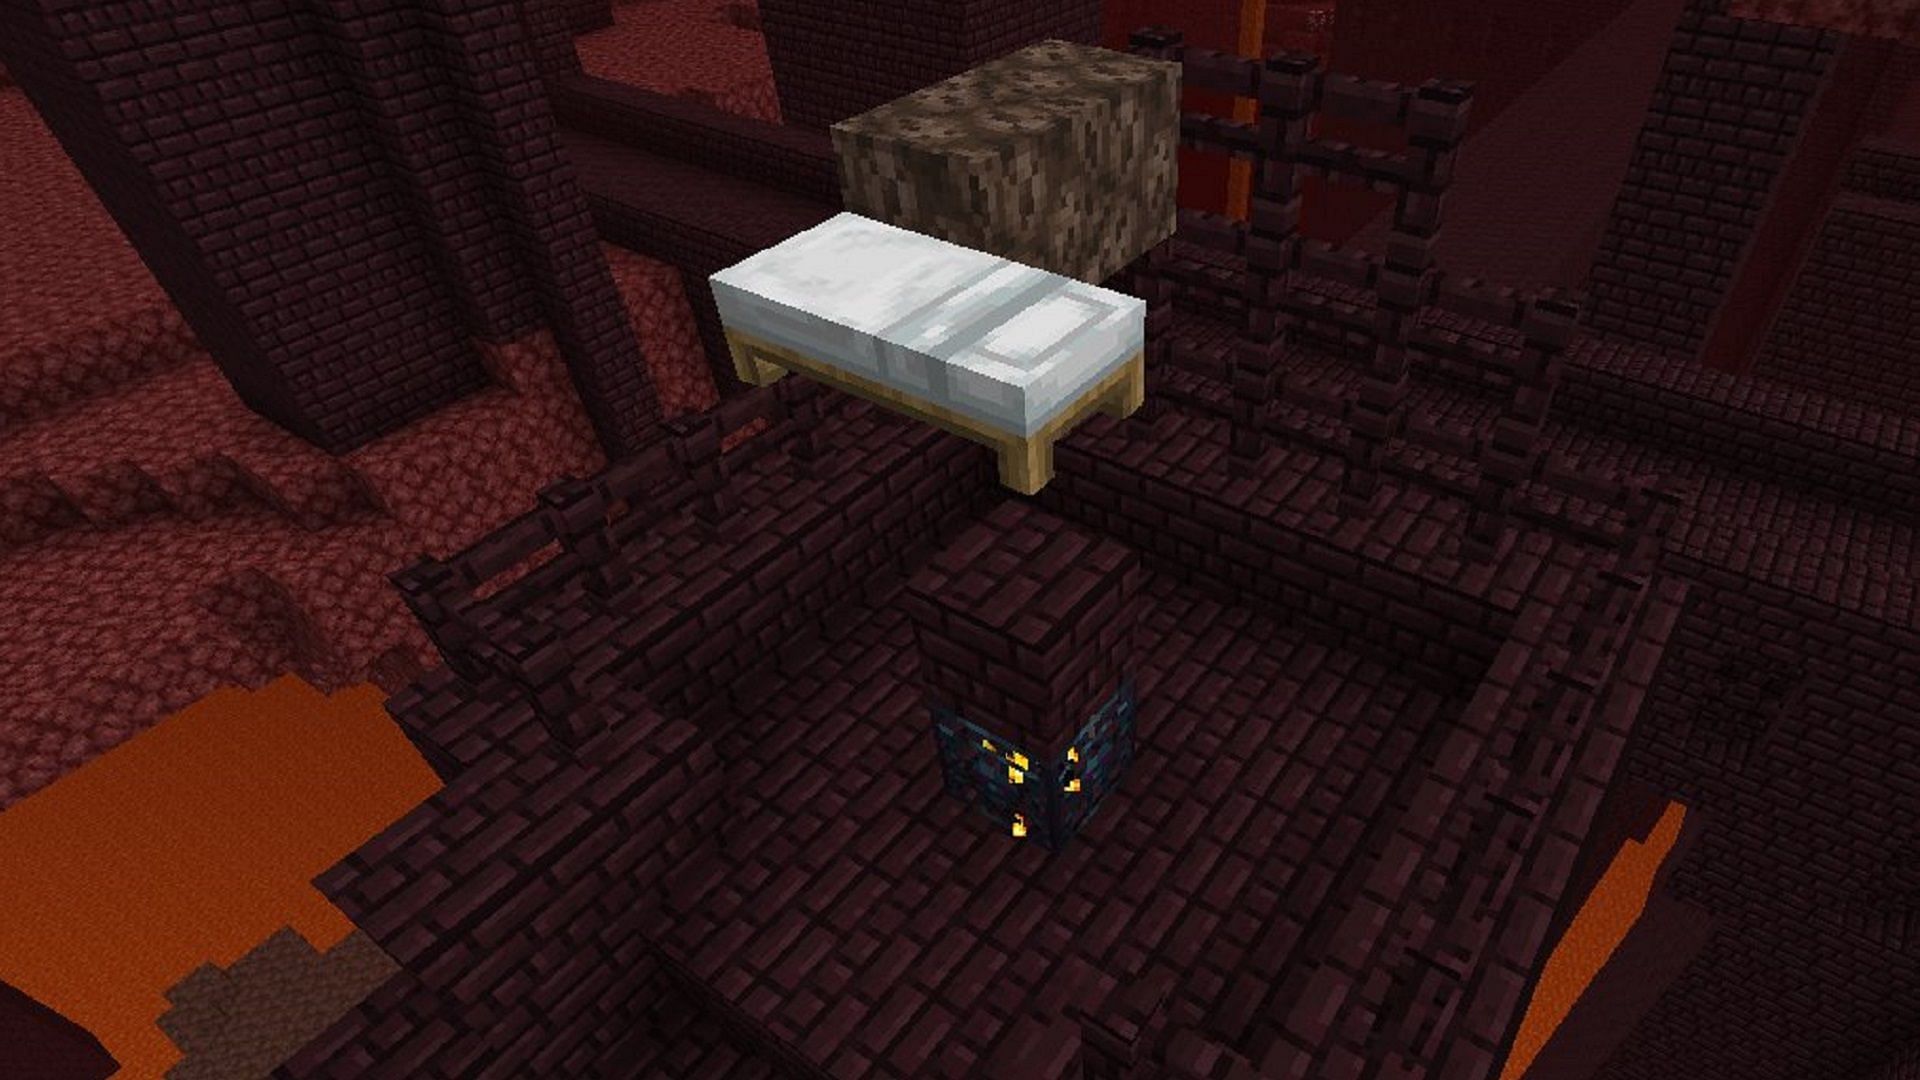 Attempting to sleep in the Nether only ends badly in Minecraft. (Image via @realcouri/X)